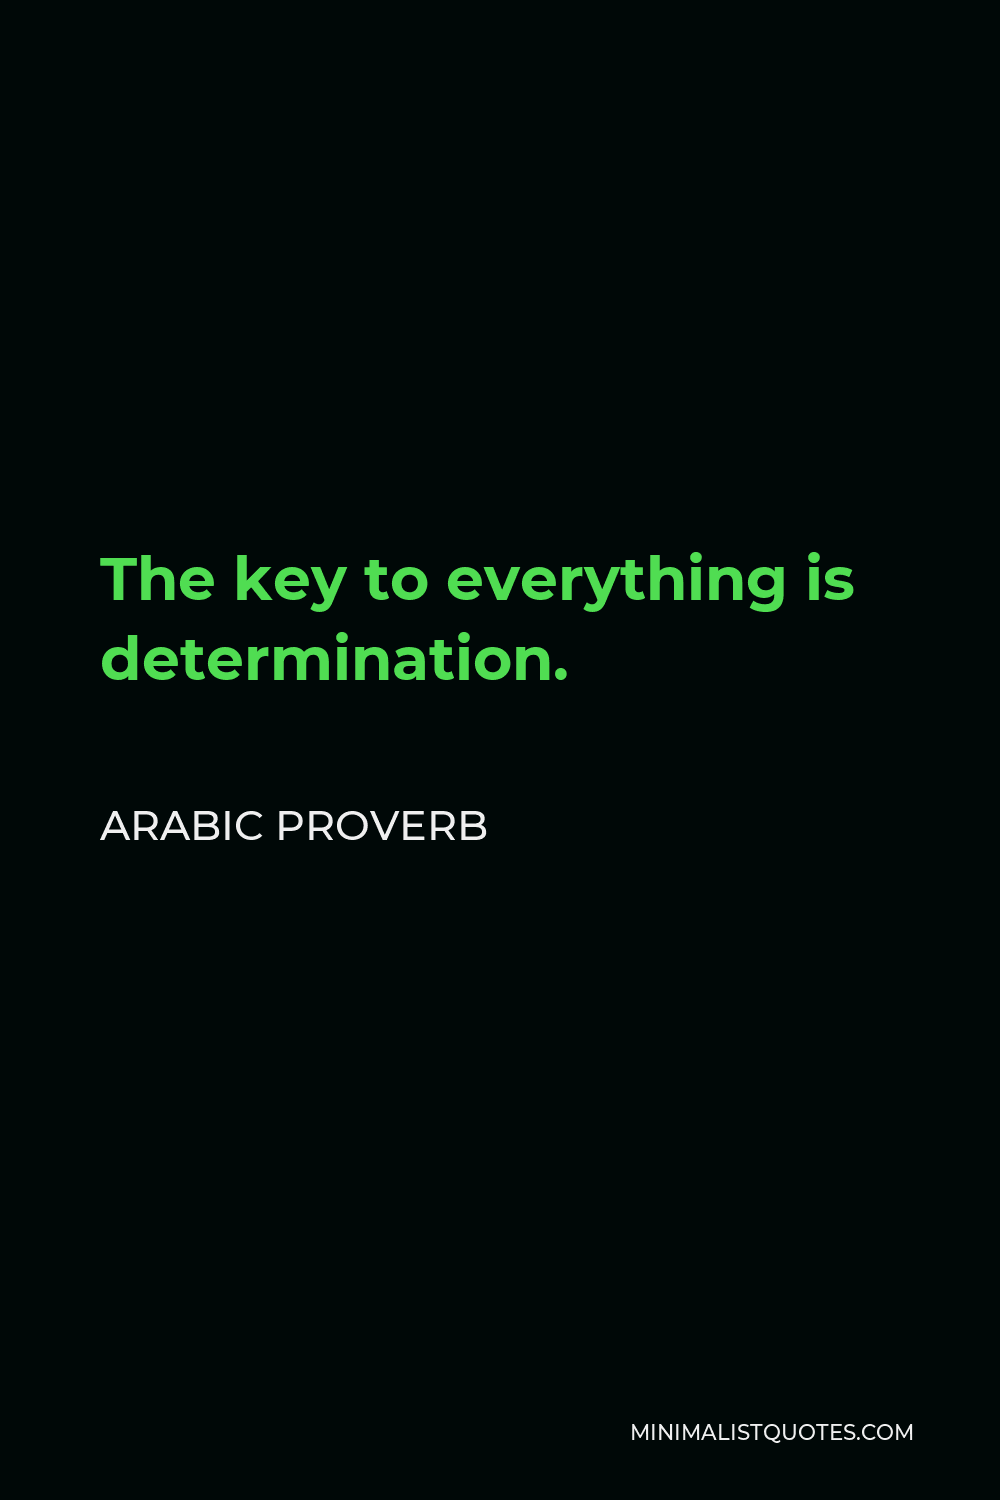 Arabic Proverb Quote - The key to everything is determination.